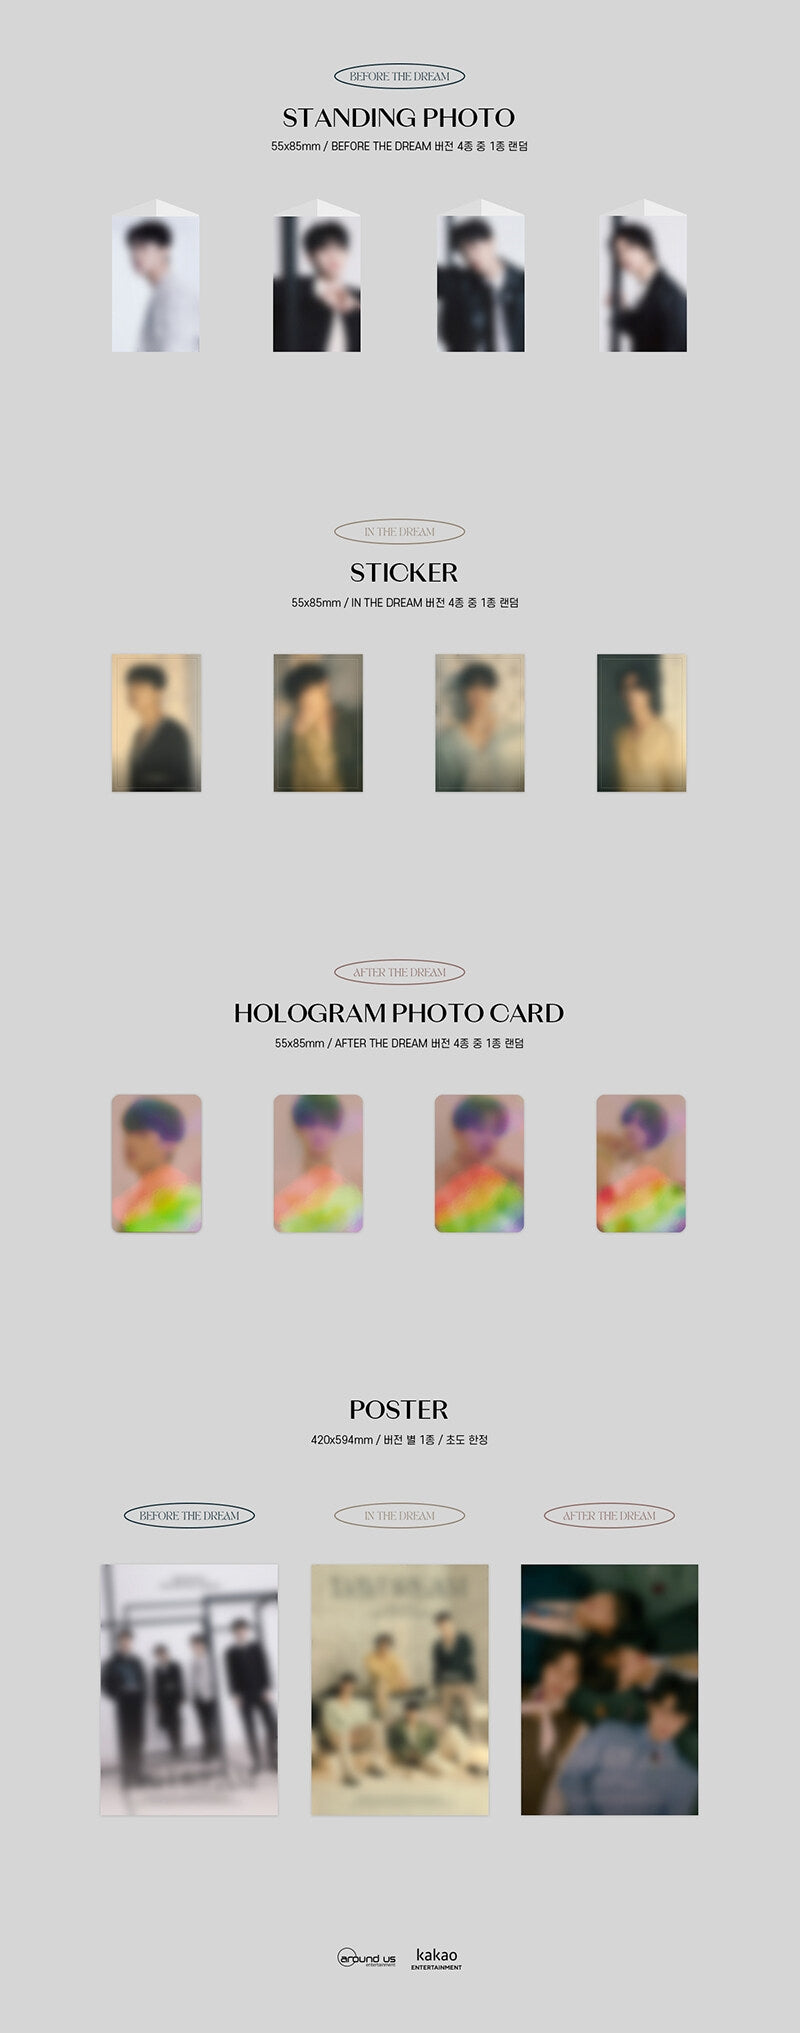 HIGHLIGHT DAYDREAM Inclusions BEFORE THE DREAM Version Only Standing Photo IN THE DREAM Version Only Sticker AFTER THE DREAM Version Only Hologram Photocard 1st Press Only Poster